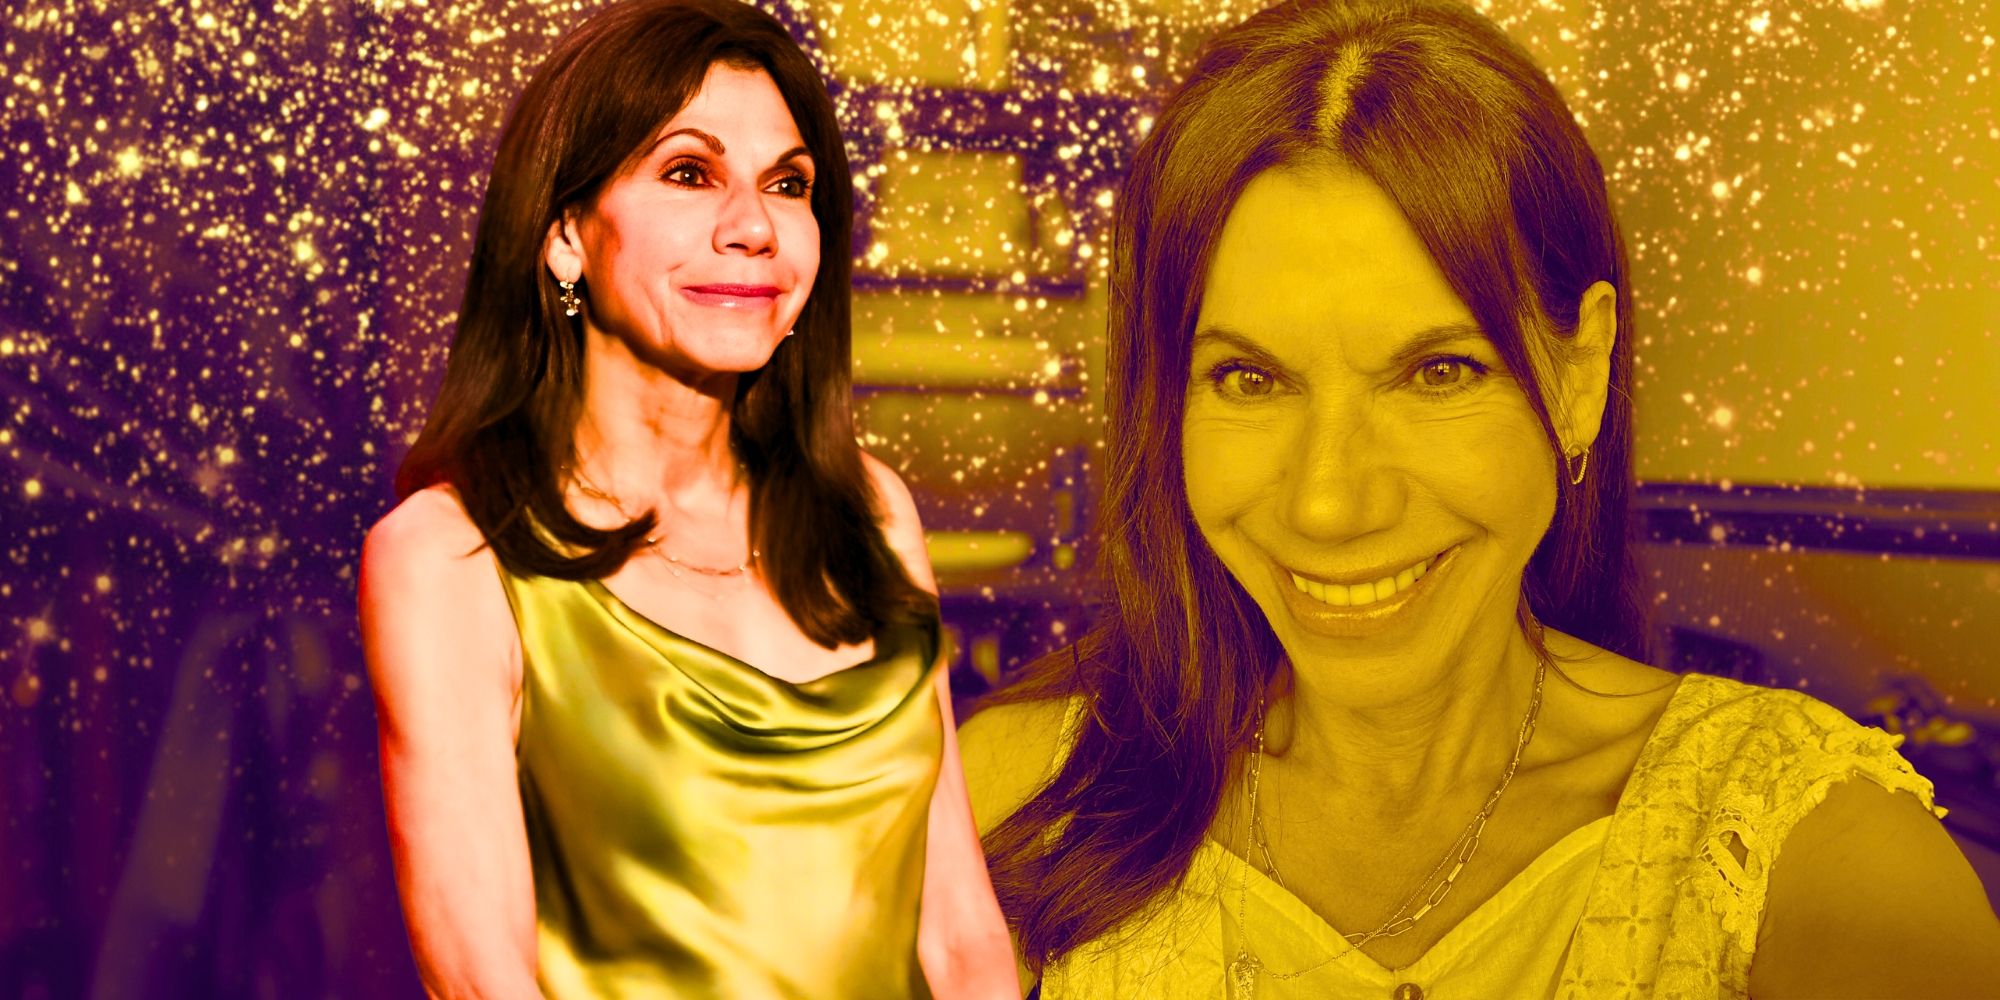 images of Theresa Nist smiling with golden background from The Golden Bachelor